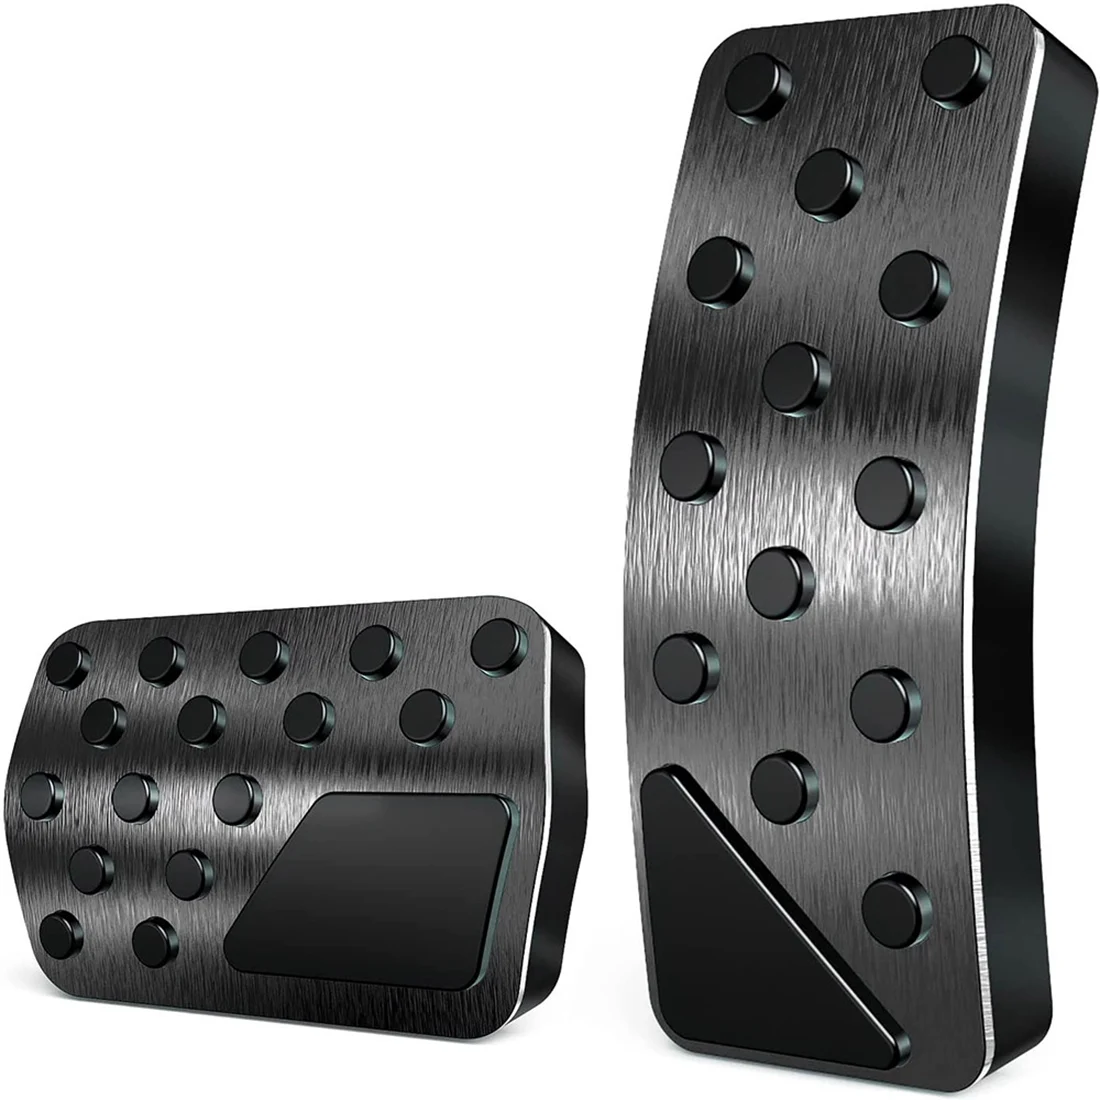 For Dodge Durango Jeep Grand Cherokee 2011-2021 No Drilling Aluminum Brake and Accelerator Pedal Covers (Black)